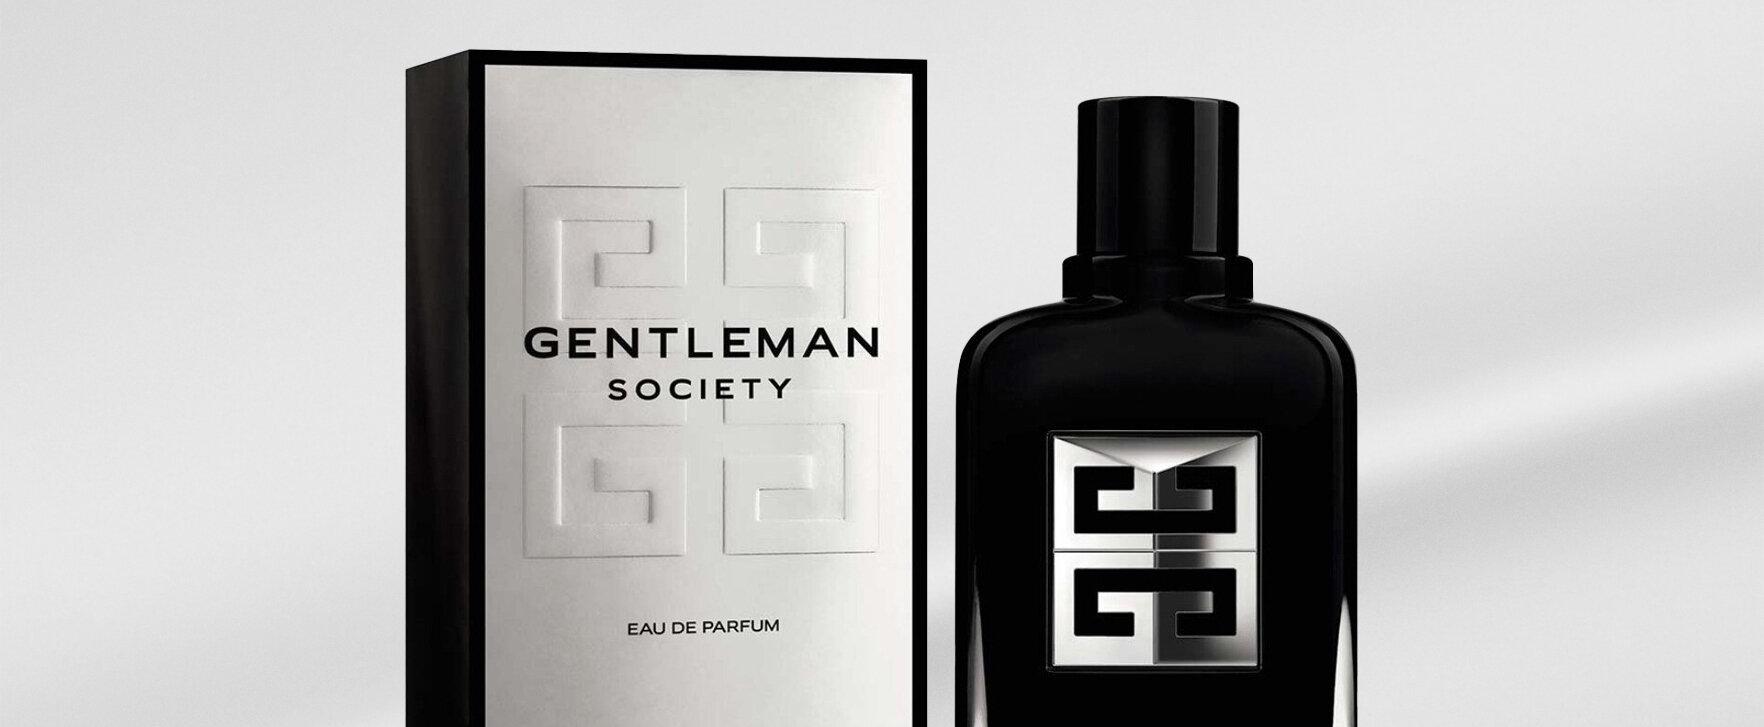 "A Redefinition of the Gentleman": Givenchy Presents New Masculine Fragrance